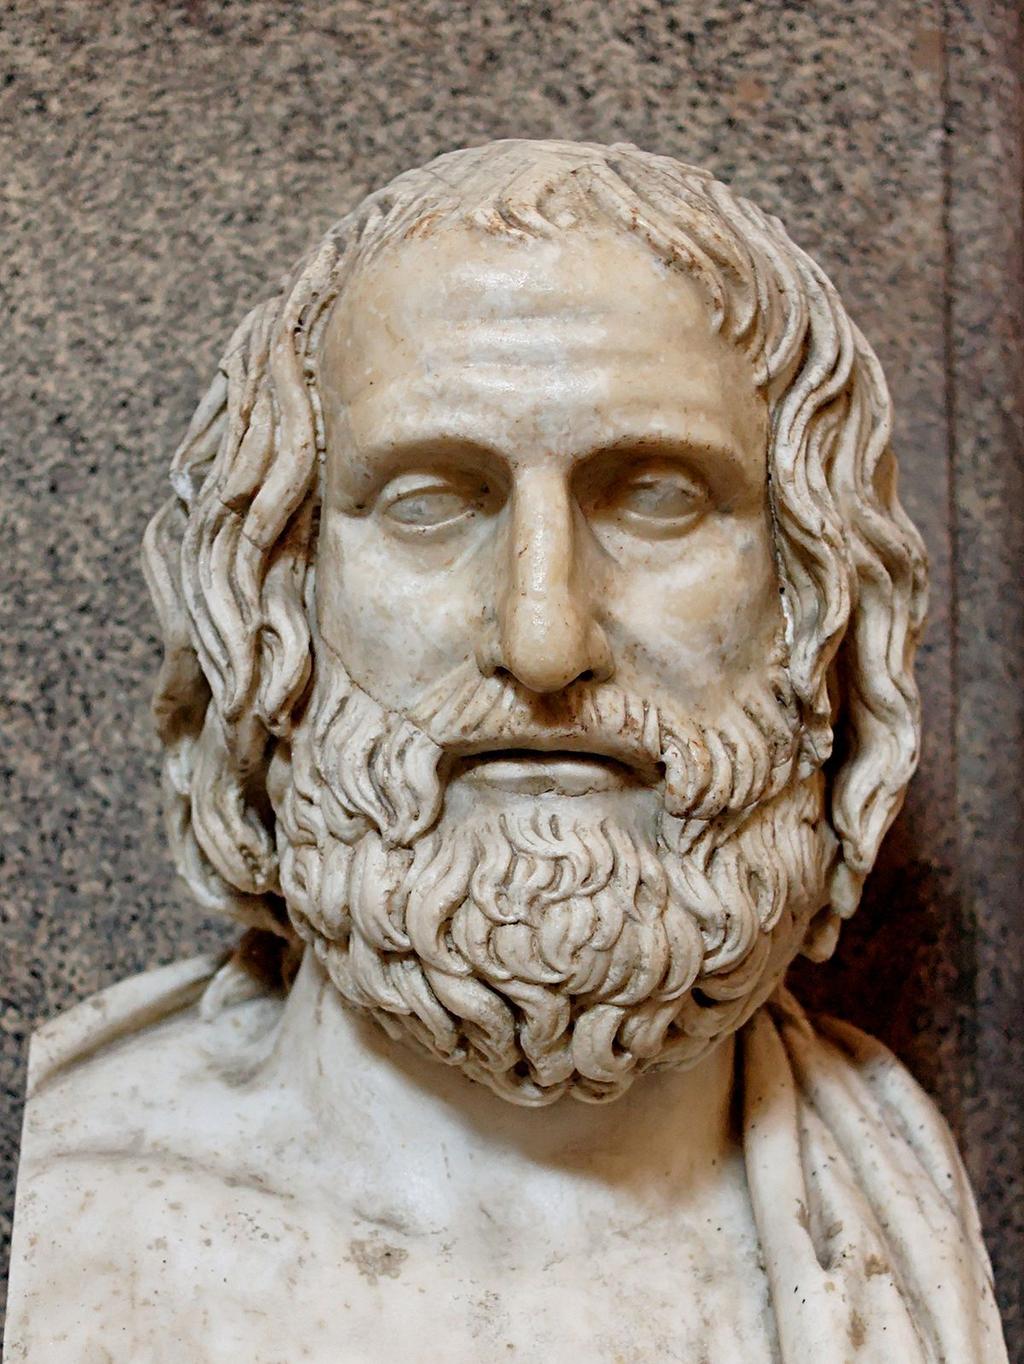 Euripides Wrote tragedies His plays suggested that people,